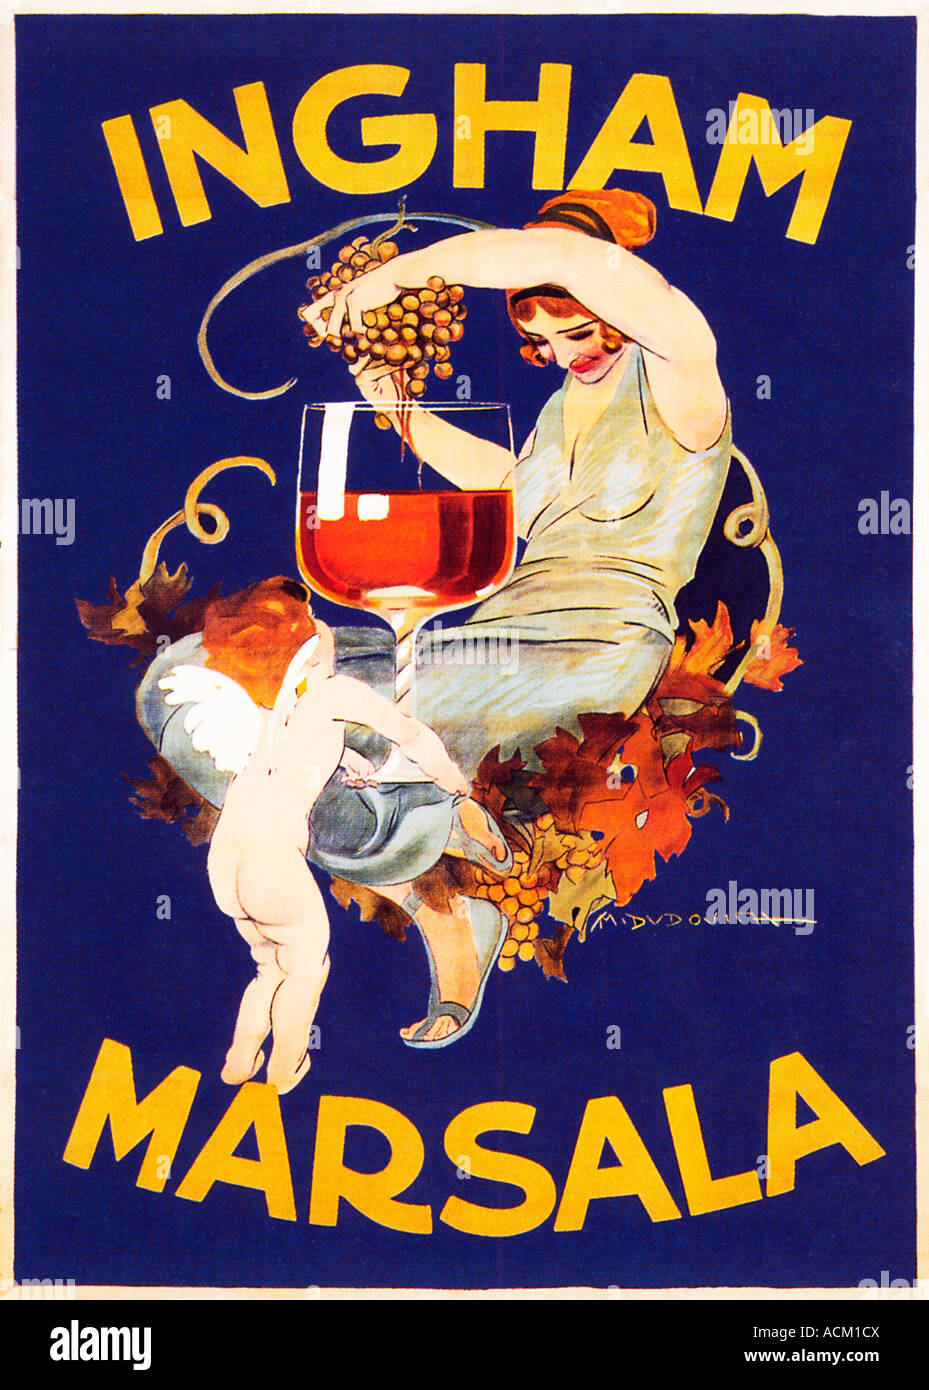 Ingham Marsala superb late Art Nouveau 1915 poster by Dudovitch for the Sicilian fortified wine Stock Photo